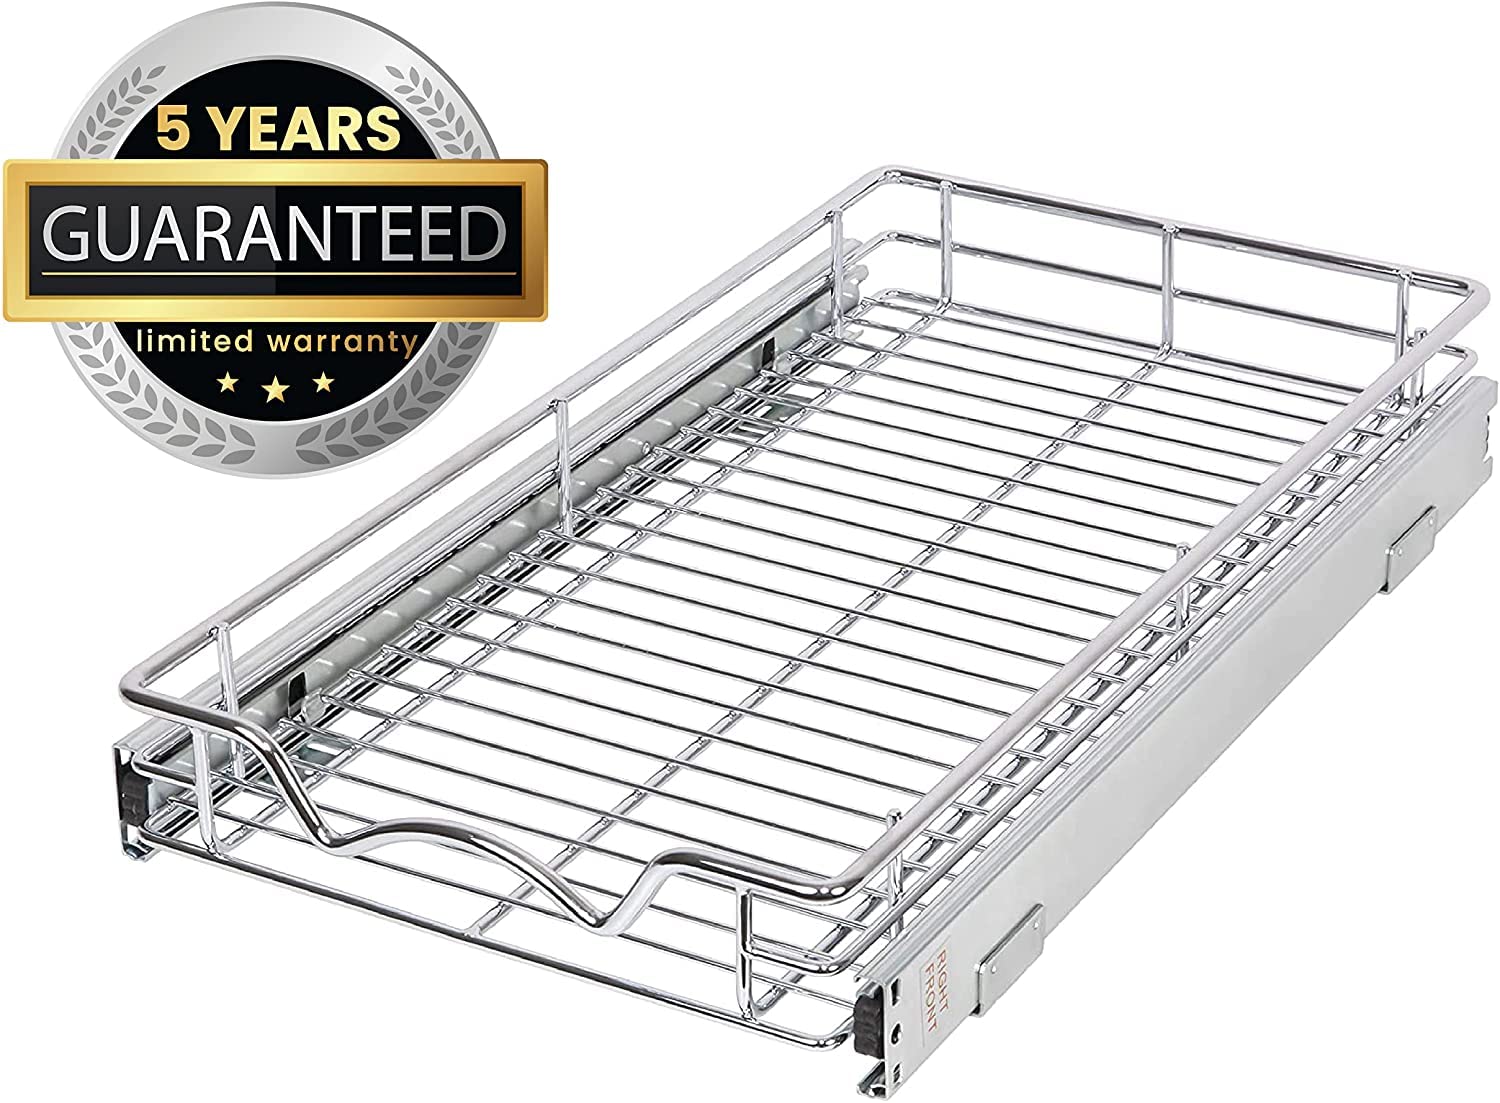 HOLD N' STORAGE Pull Out Cabinet Organizer, Heavy Duty-with Lifetime Limited Warranty -11�W x 21�D - Requires At Least a 12-1/4� Cabinet Opening, Steel Metal cabinet drawers slide out, Chrome Finish  - Very Good